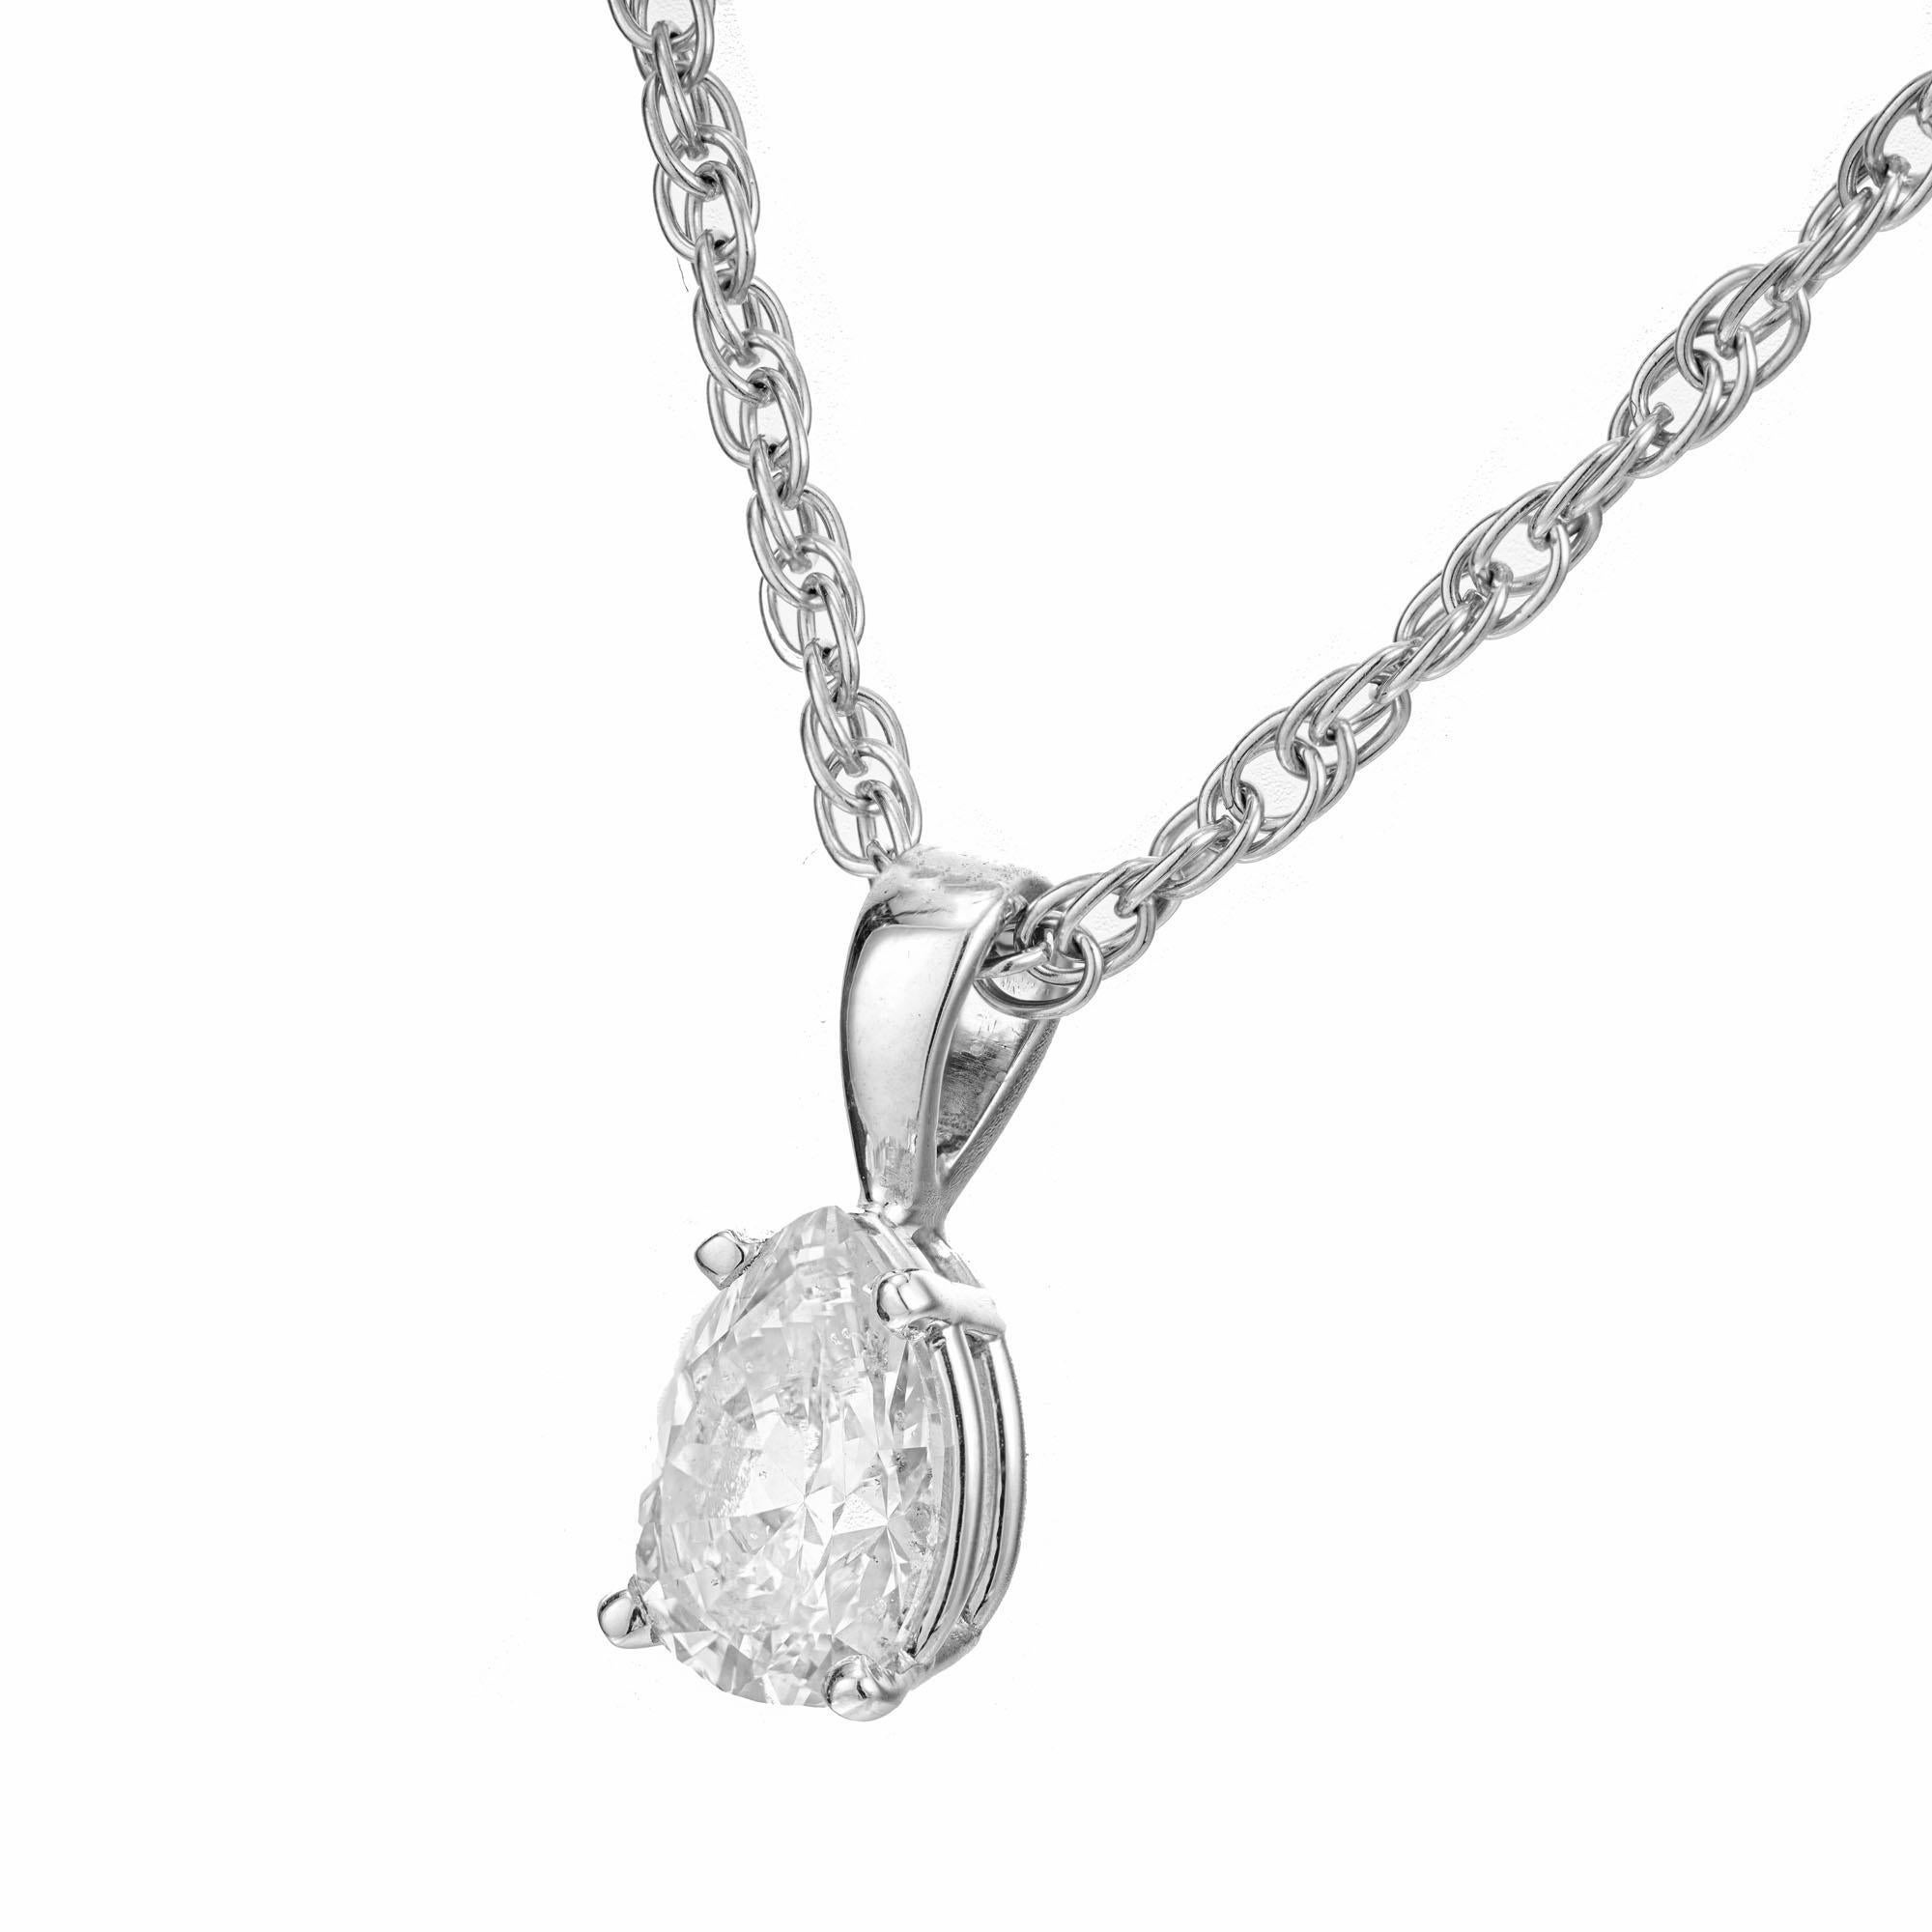 Pear shape diamond pendant necklace. GIA certified 1.00 carat pear shaped diamond set in a 14k white gold basket setting. 14k white gold 15.75 inch chain. Designed and crafted in the Peter Suchy workshop

1 pear shape diamond, G I approx. 1.00ct
14k